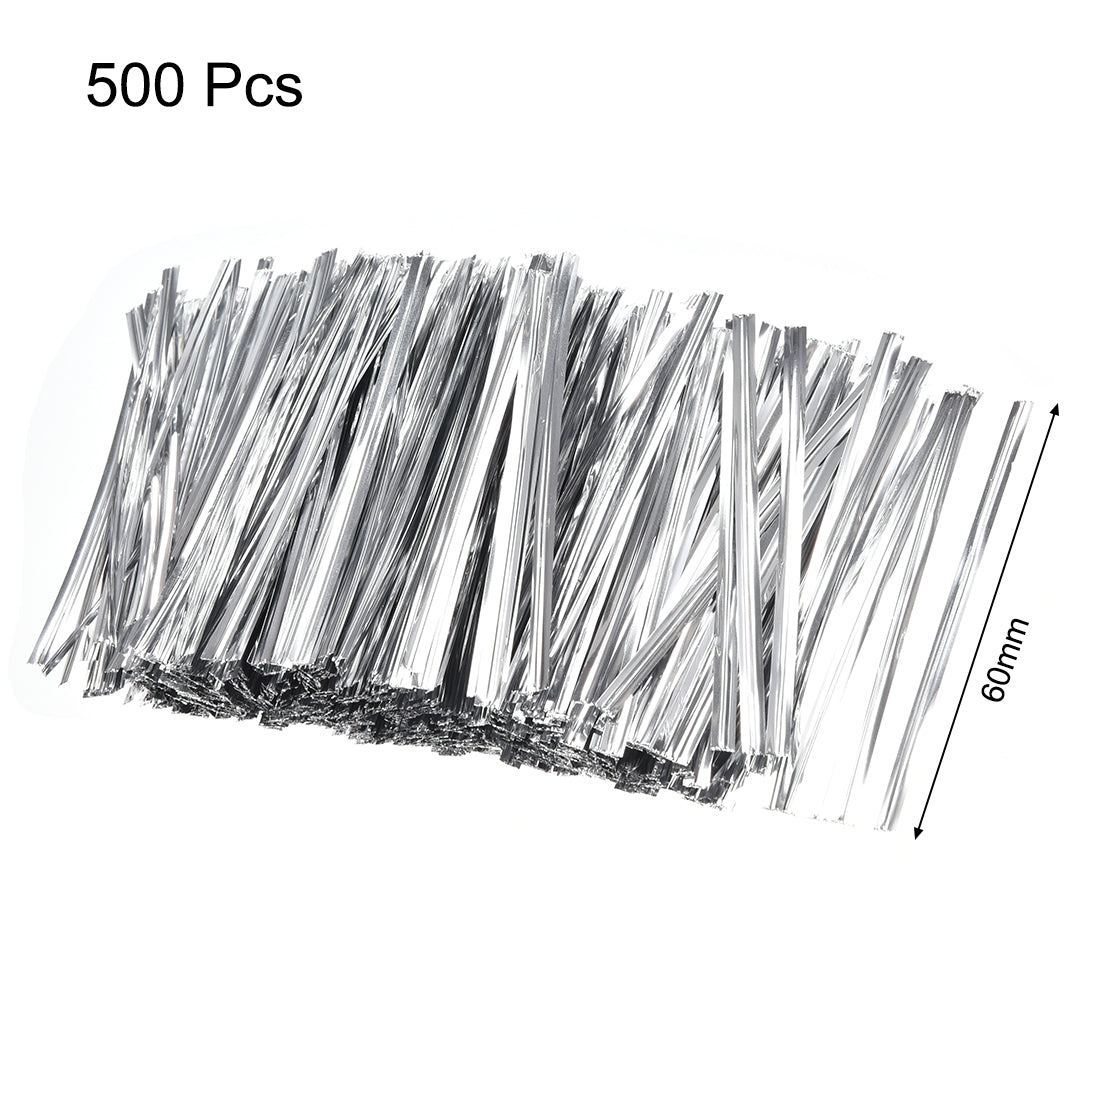 uxcell Uxcell Long Strong Twist Ties 2.4 Inches Quality Plastic Closure Tie for Tying Gift Bags Art Craft Ties Manage Cords Silvery 500pcs